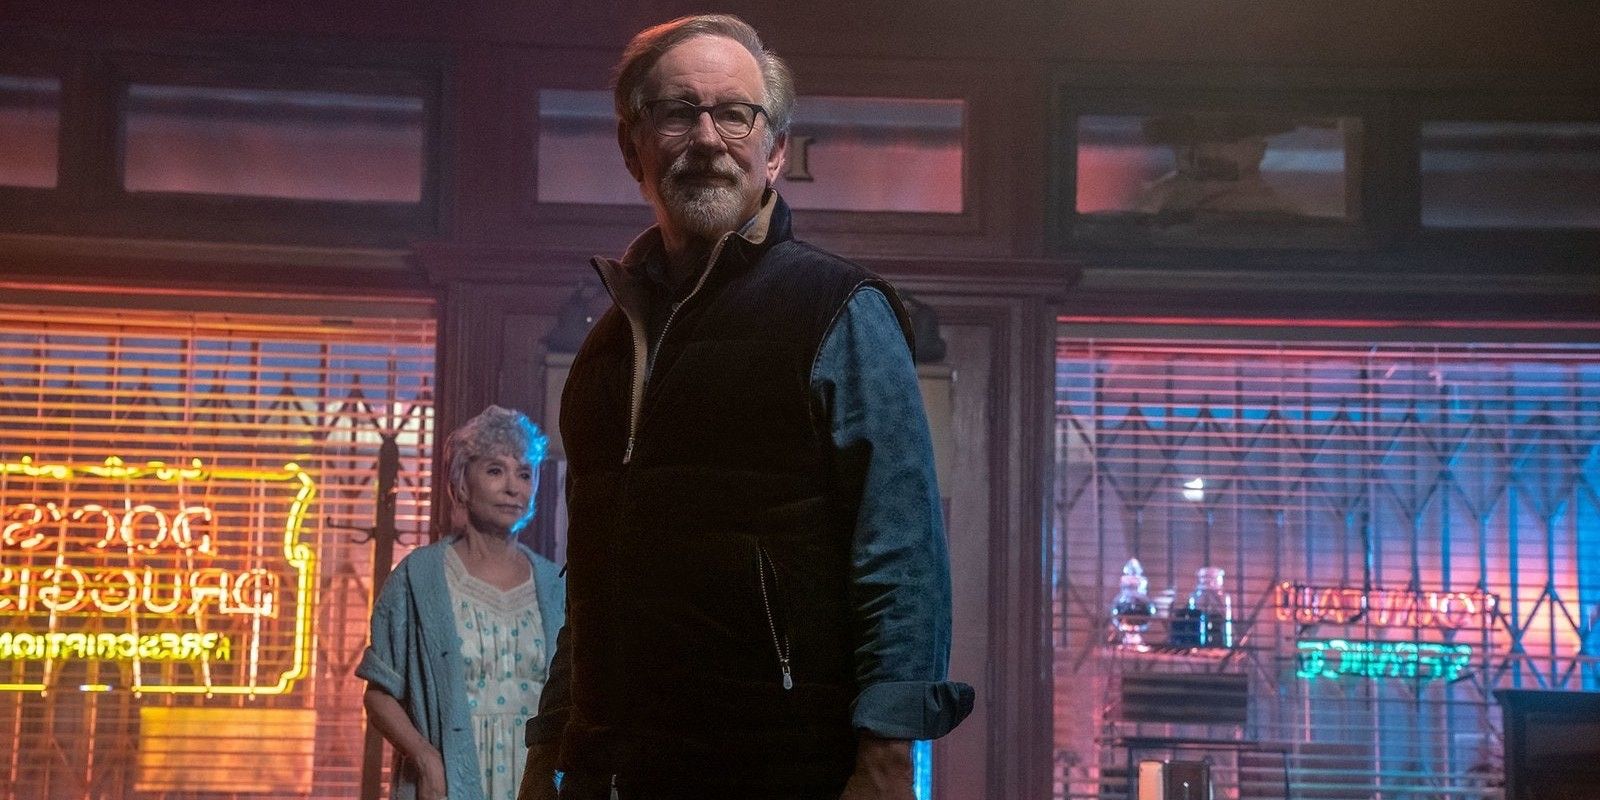 Steven Spielberg and Rita Moreno on West Side Story 2020 set